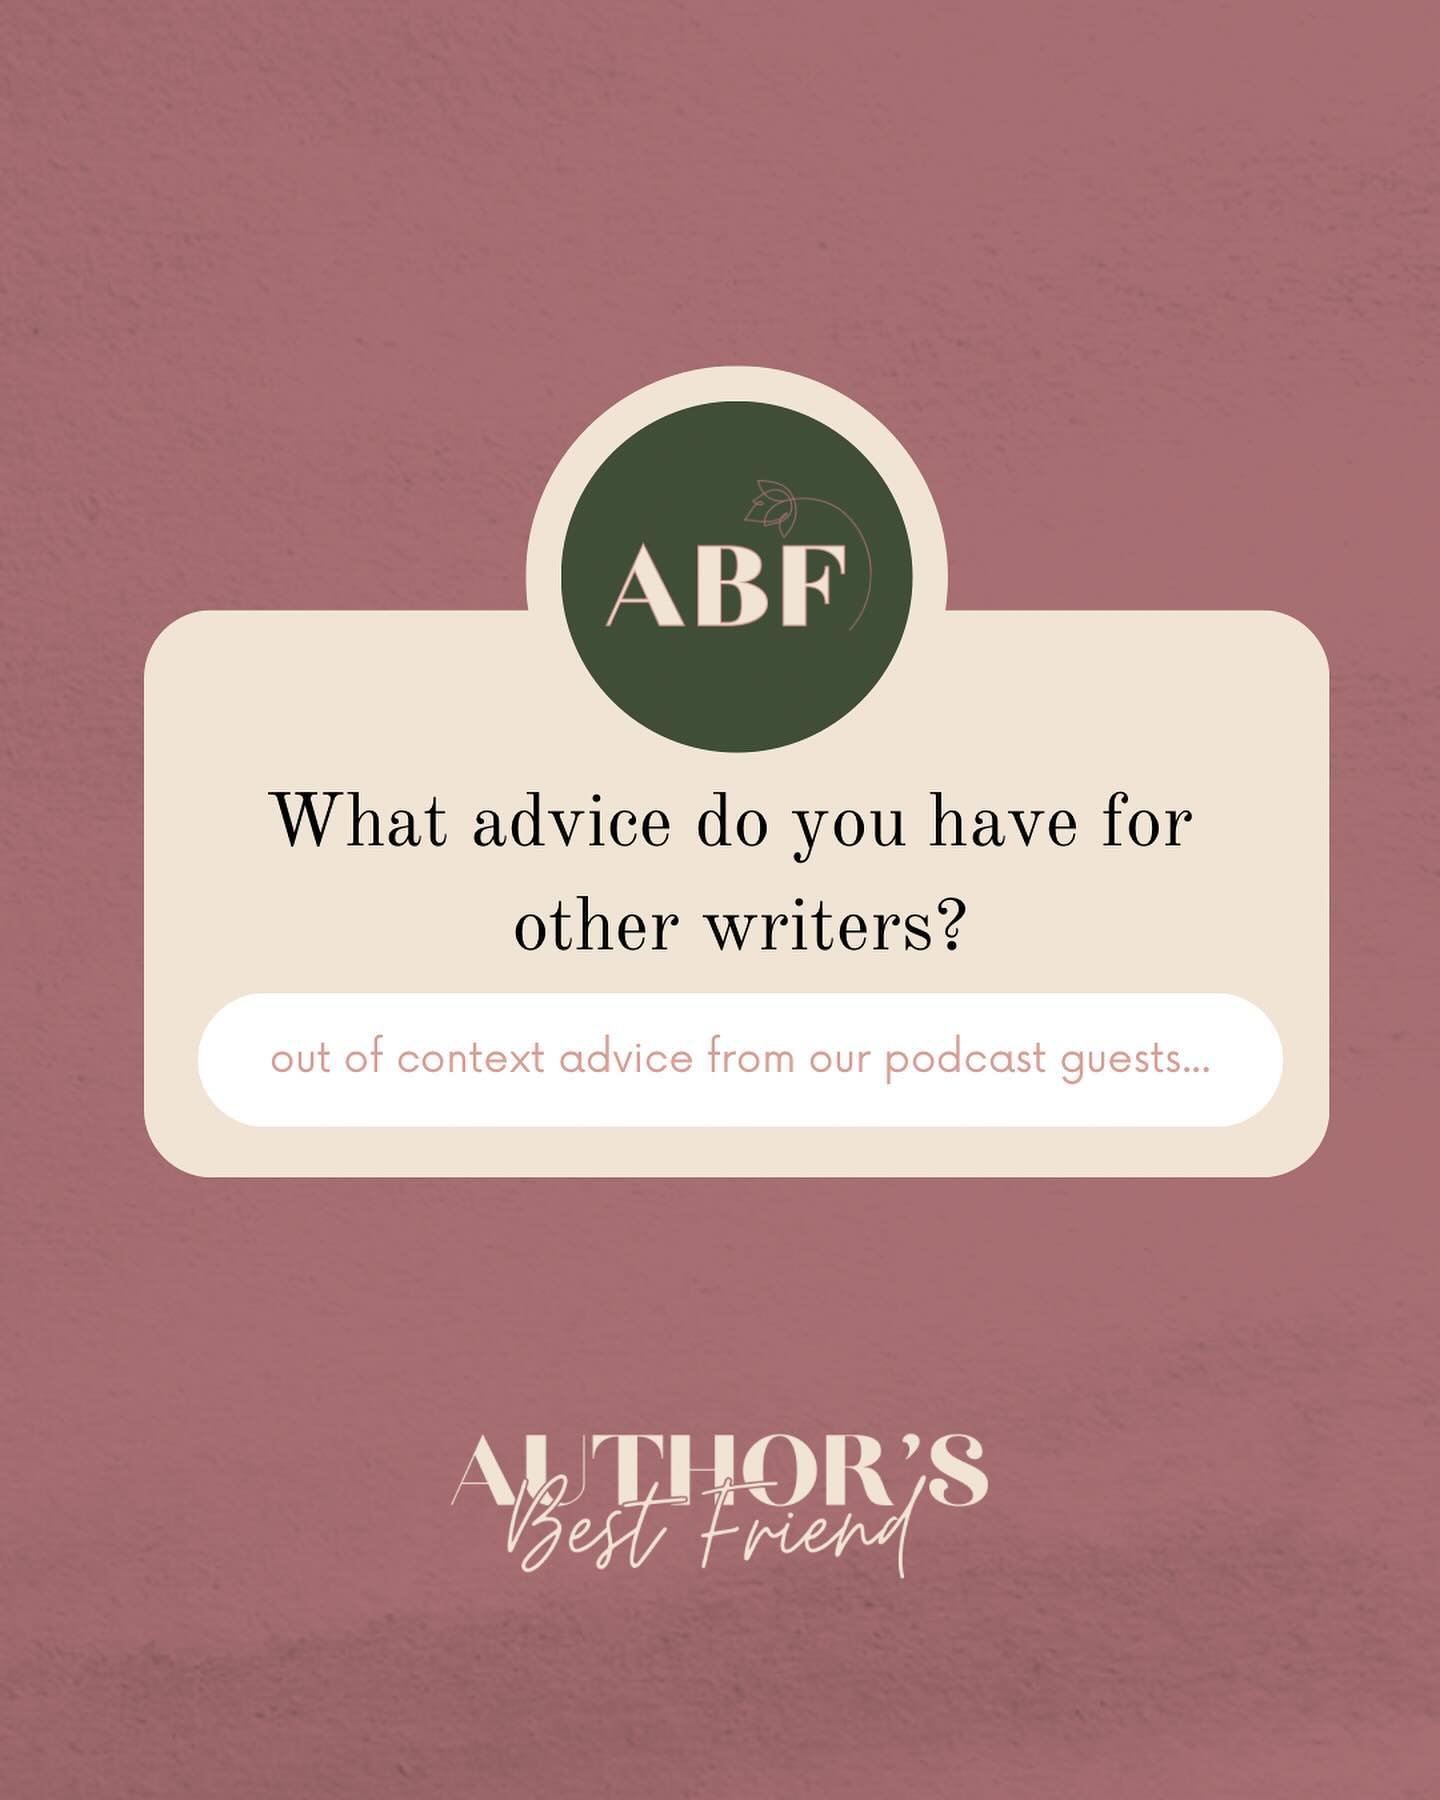 One of our favorite parts of the podcast is how much indie authors love to share their process and tips they&rsquo;ve learned along the way. 

Indie authors, what&rsquo;s your favorite piece of advice you&rsquo;ve gotten?

Readers, what are you most 